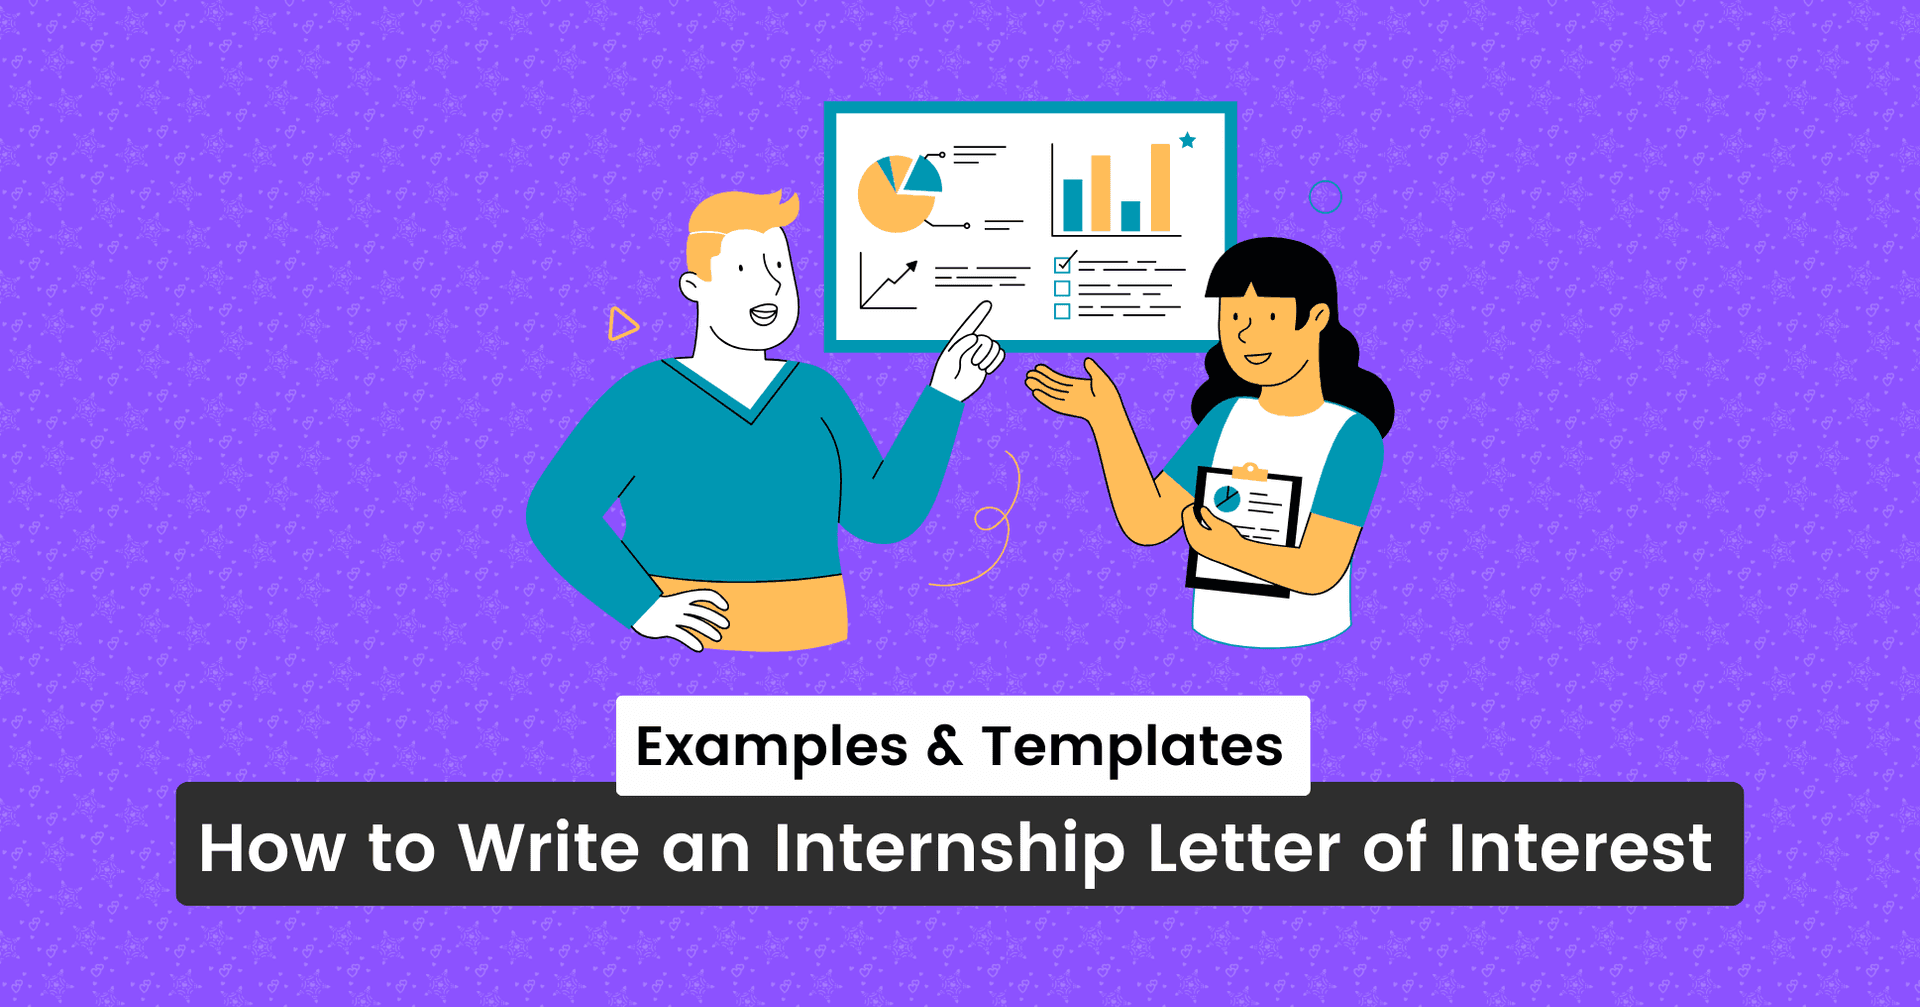 How to Write an Internship Letter of Interest: Examples and Template